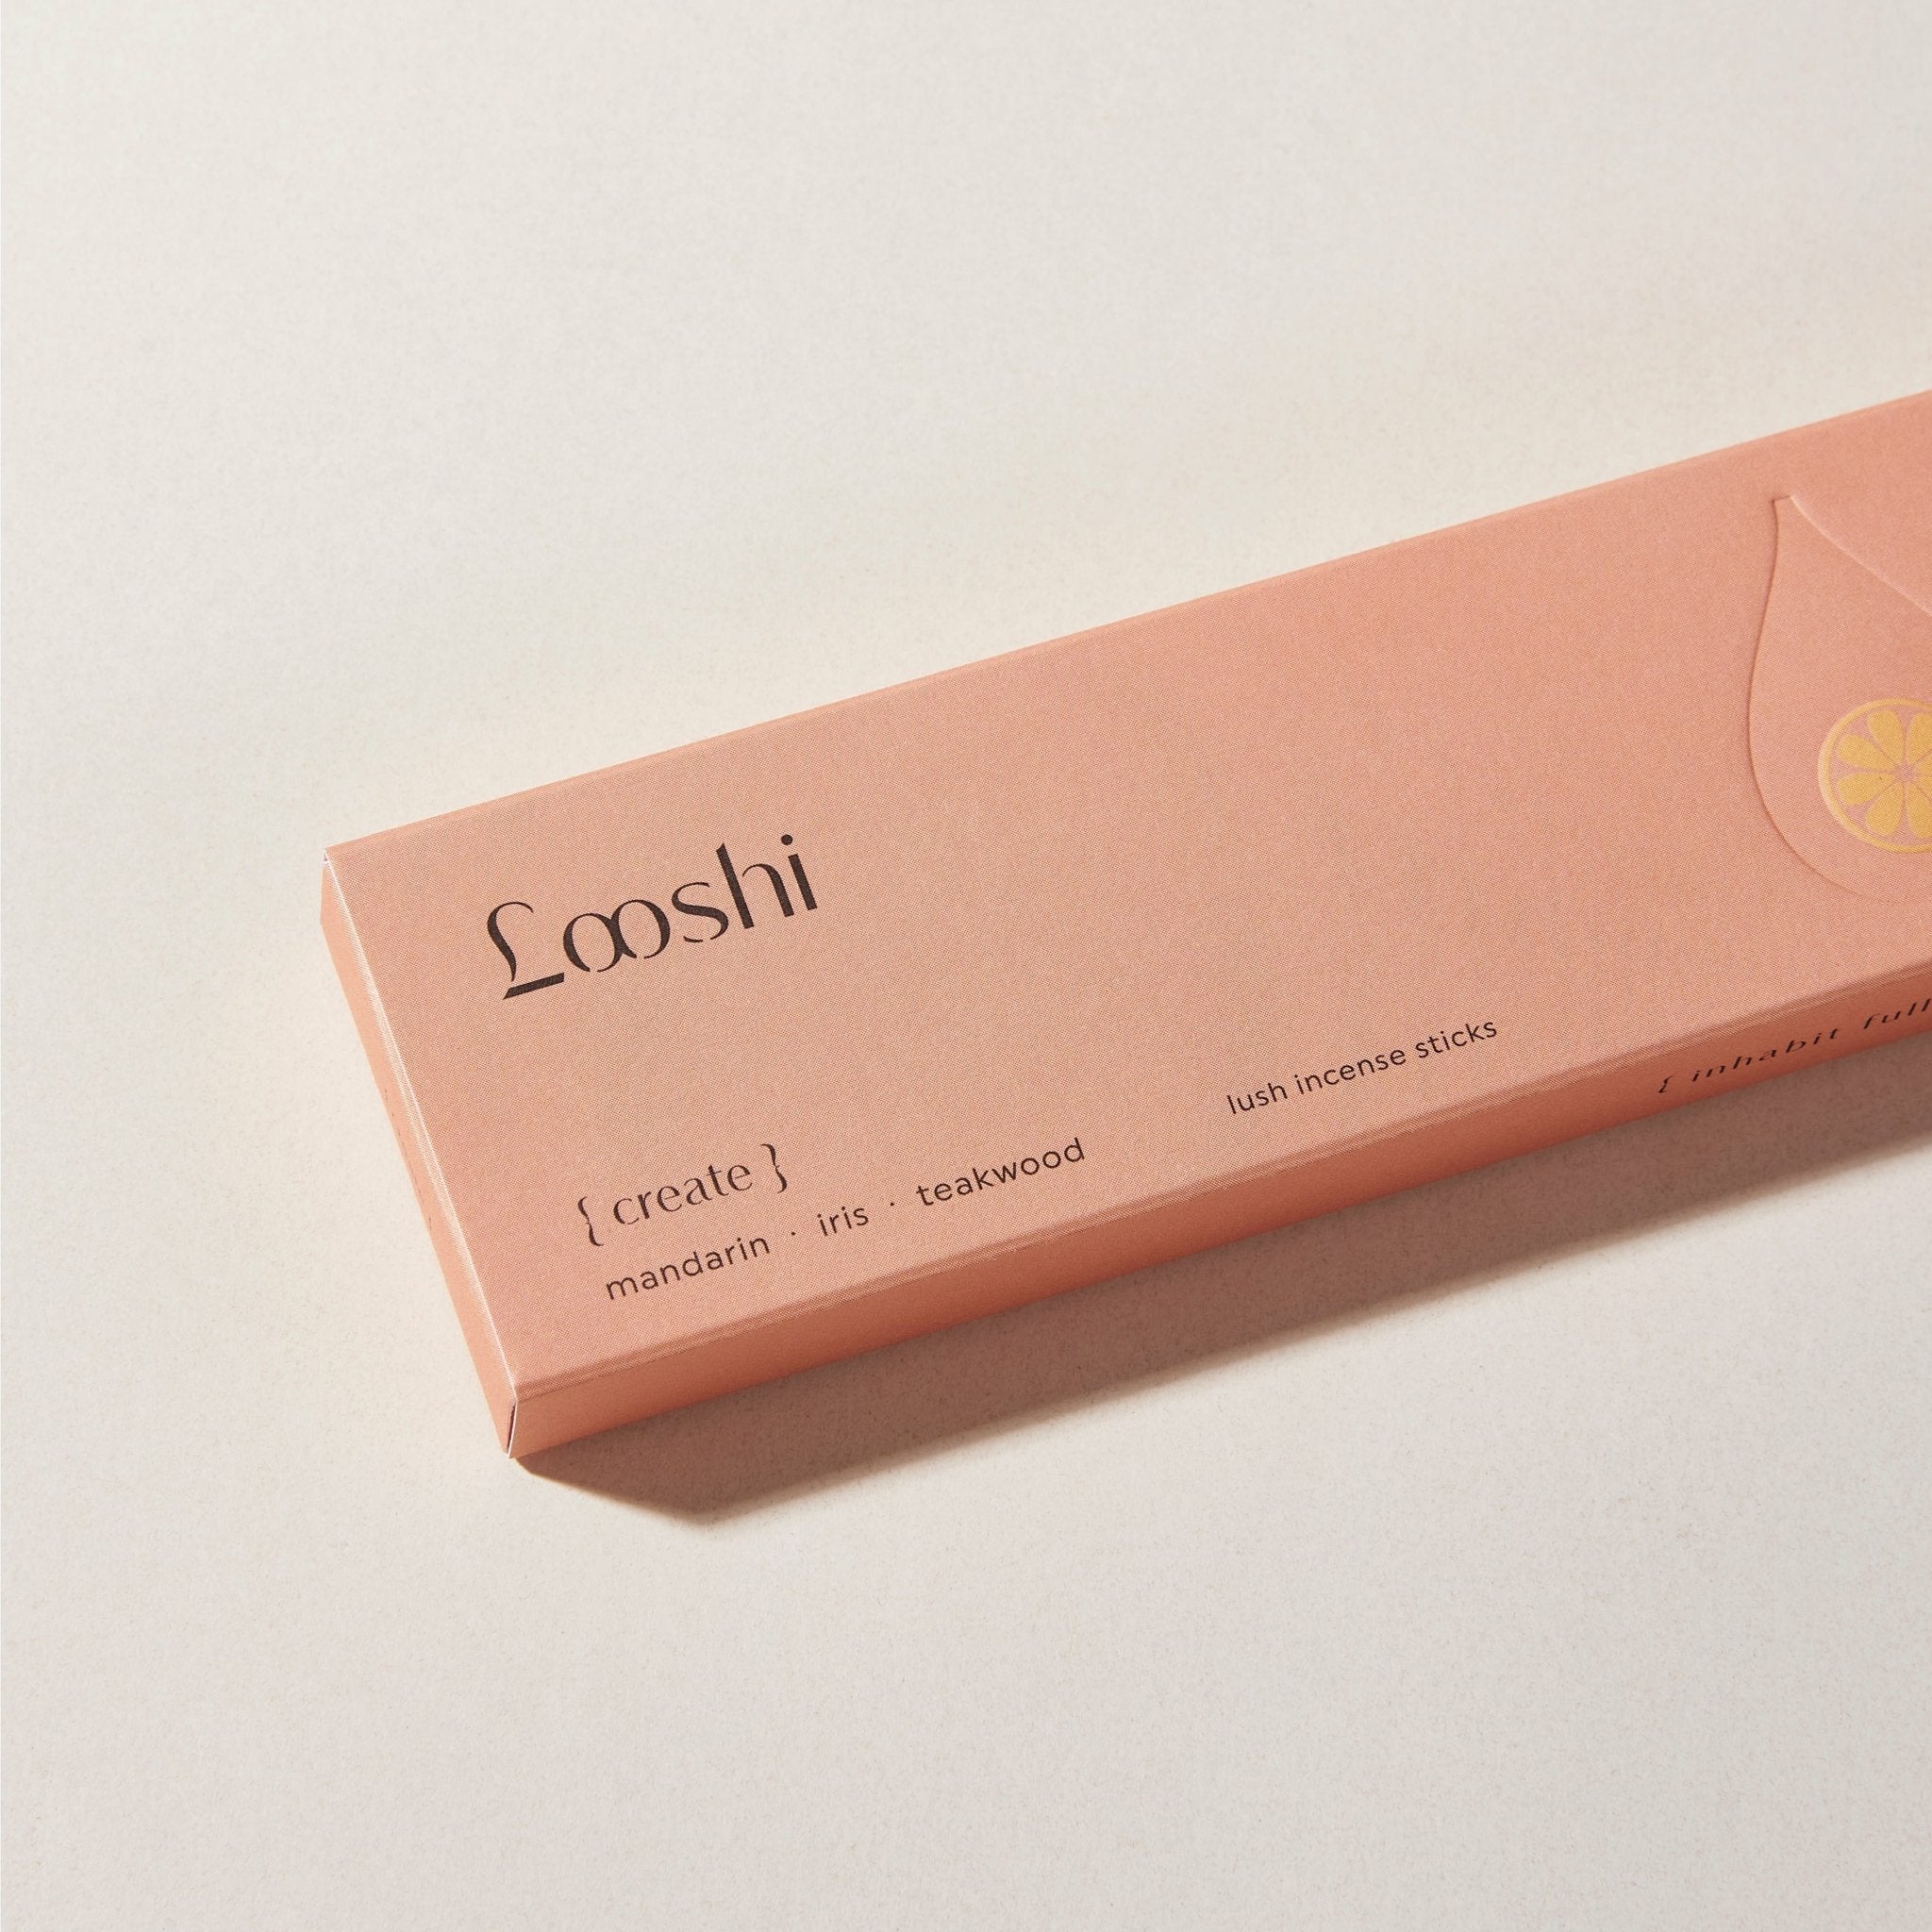 create incense sticks from hellolooshi.